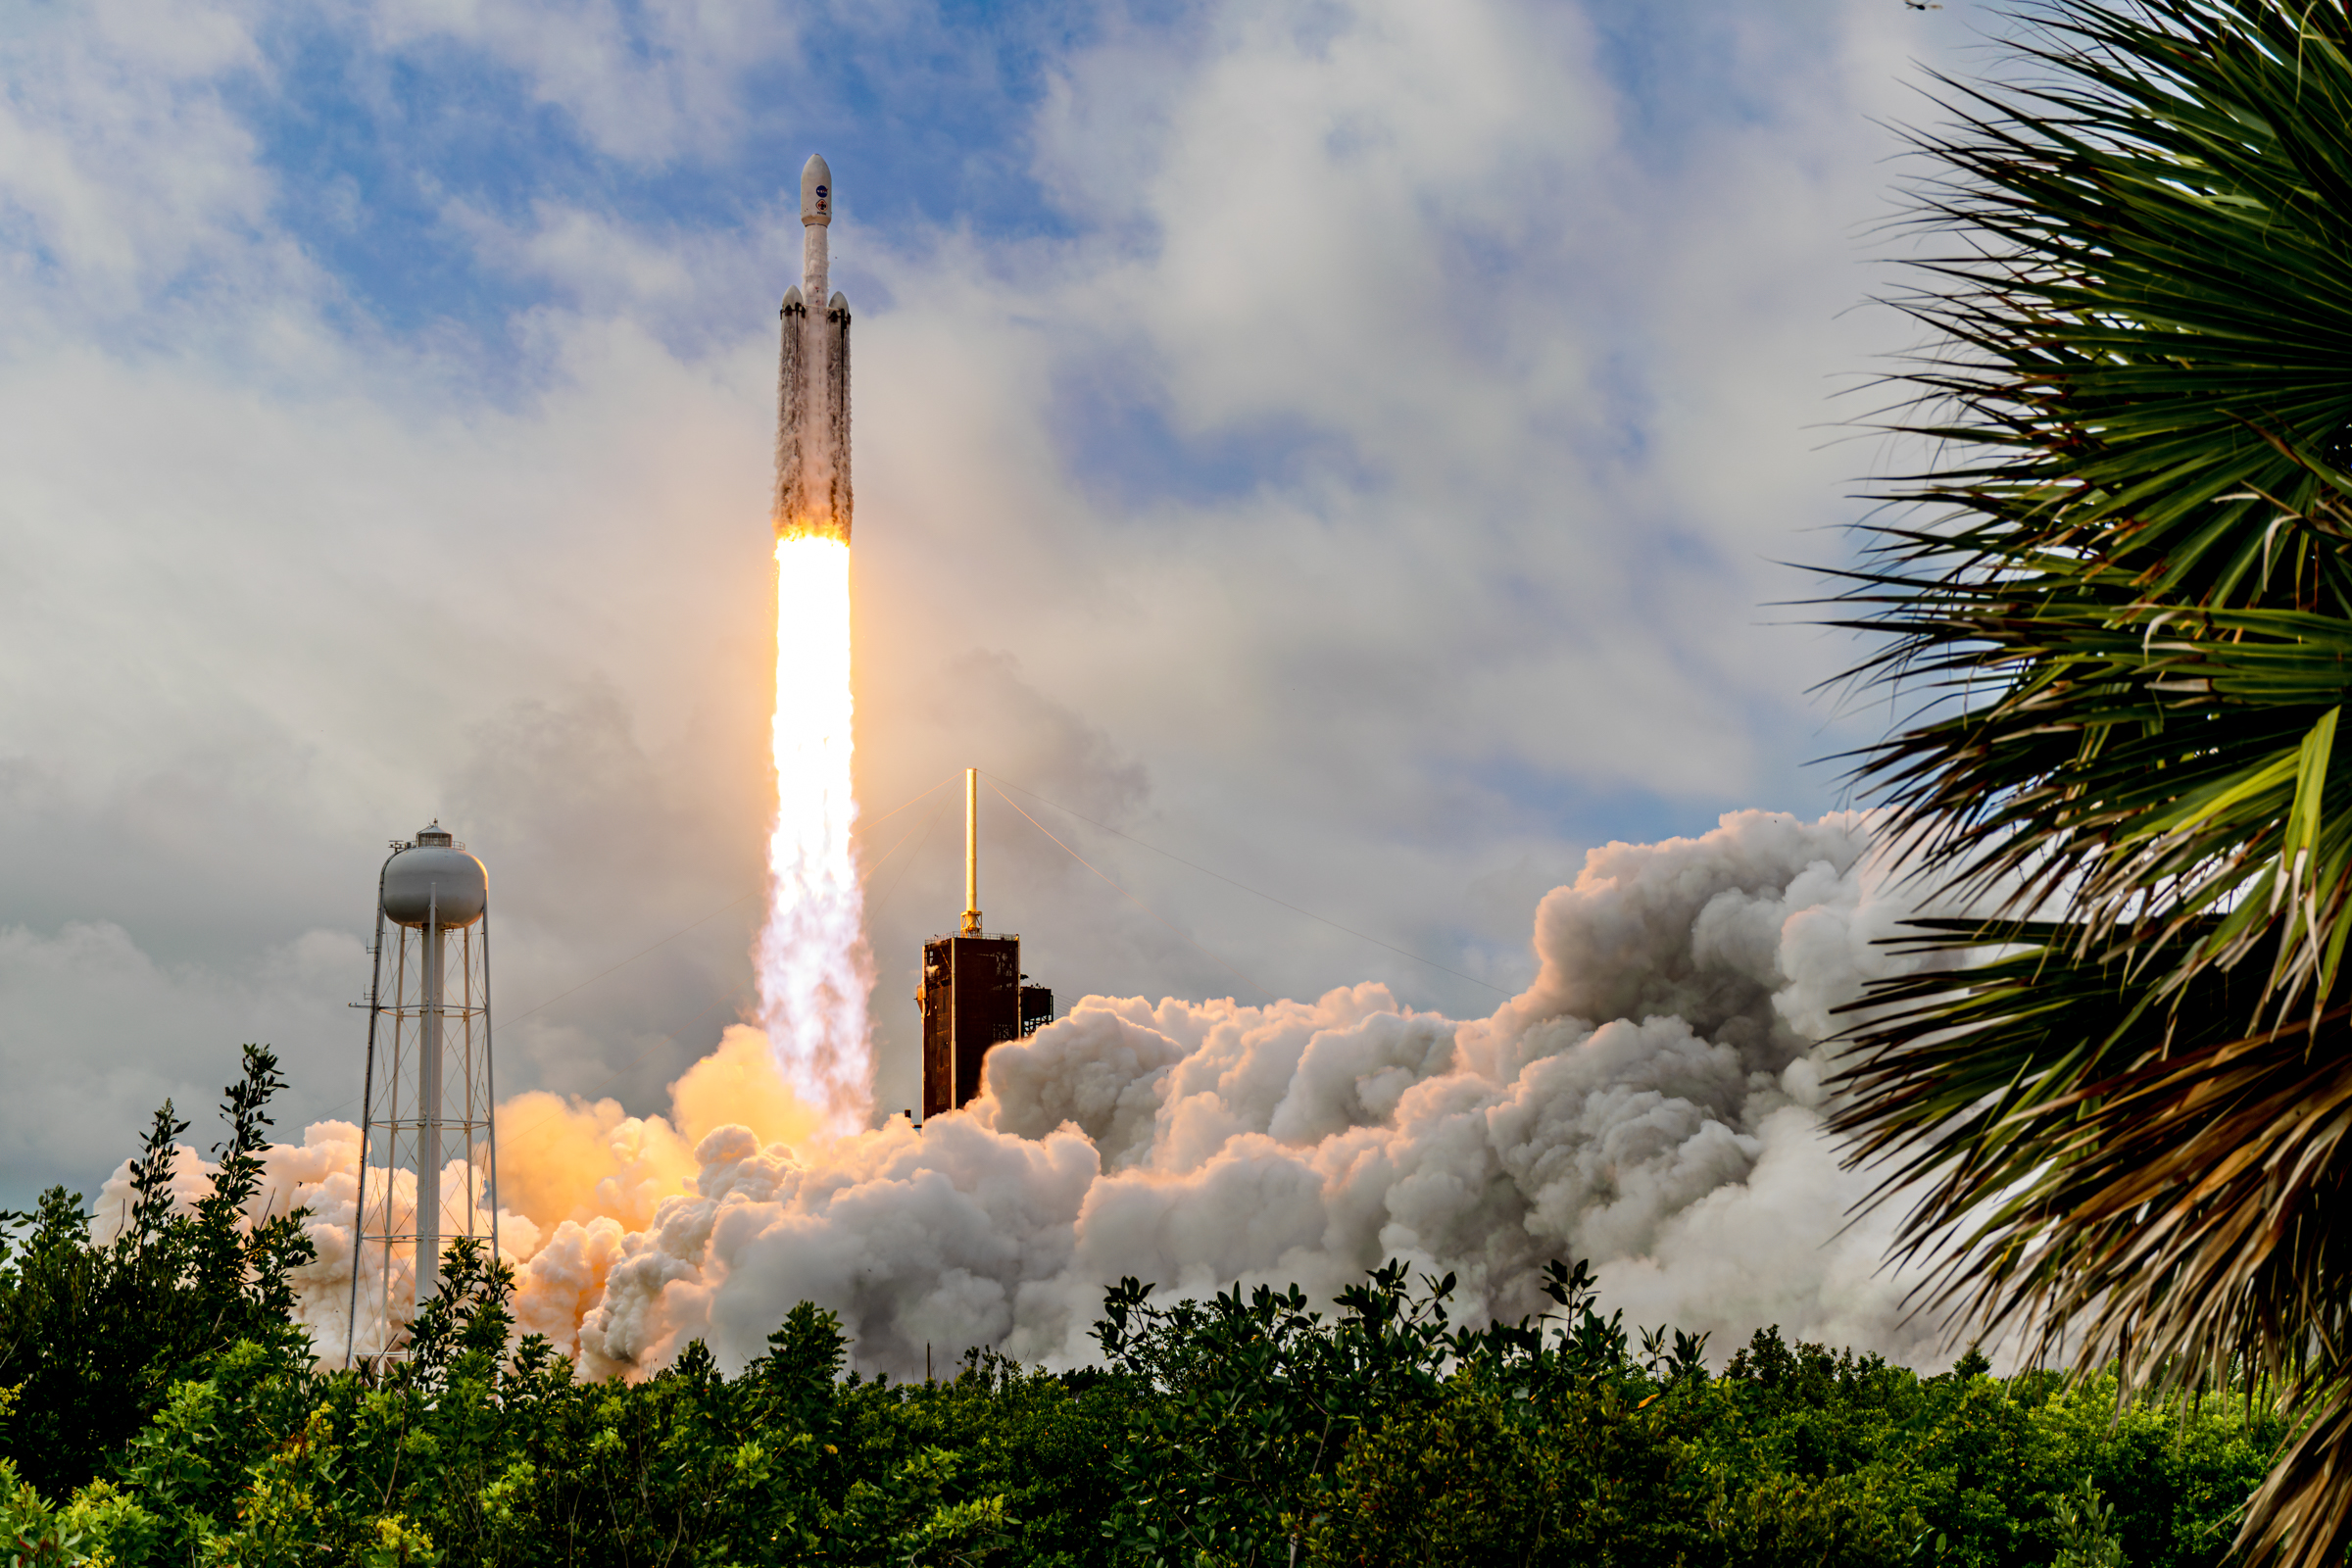 A Falcon Heavy rocket lifts off from Launch Complex-39A at NASA's Kennedy Space Center. There is mangroves and a palm tree in the foreground. The rocket is just clearing the tower and the exhaust plume is expanding towards the camera.